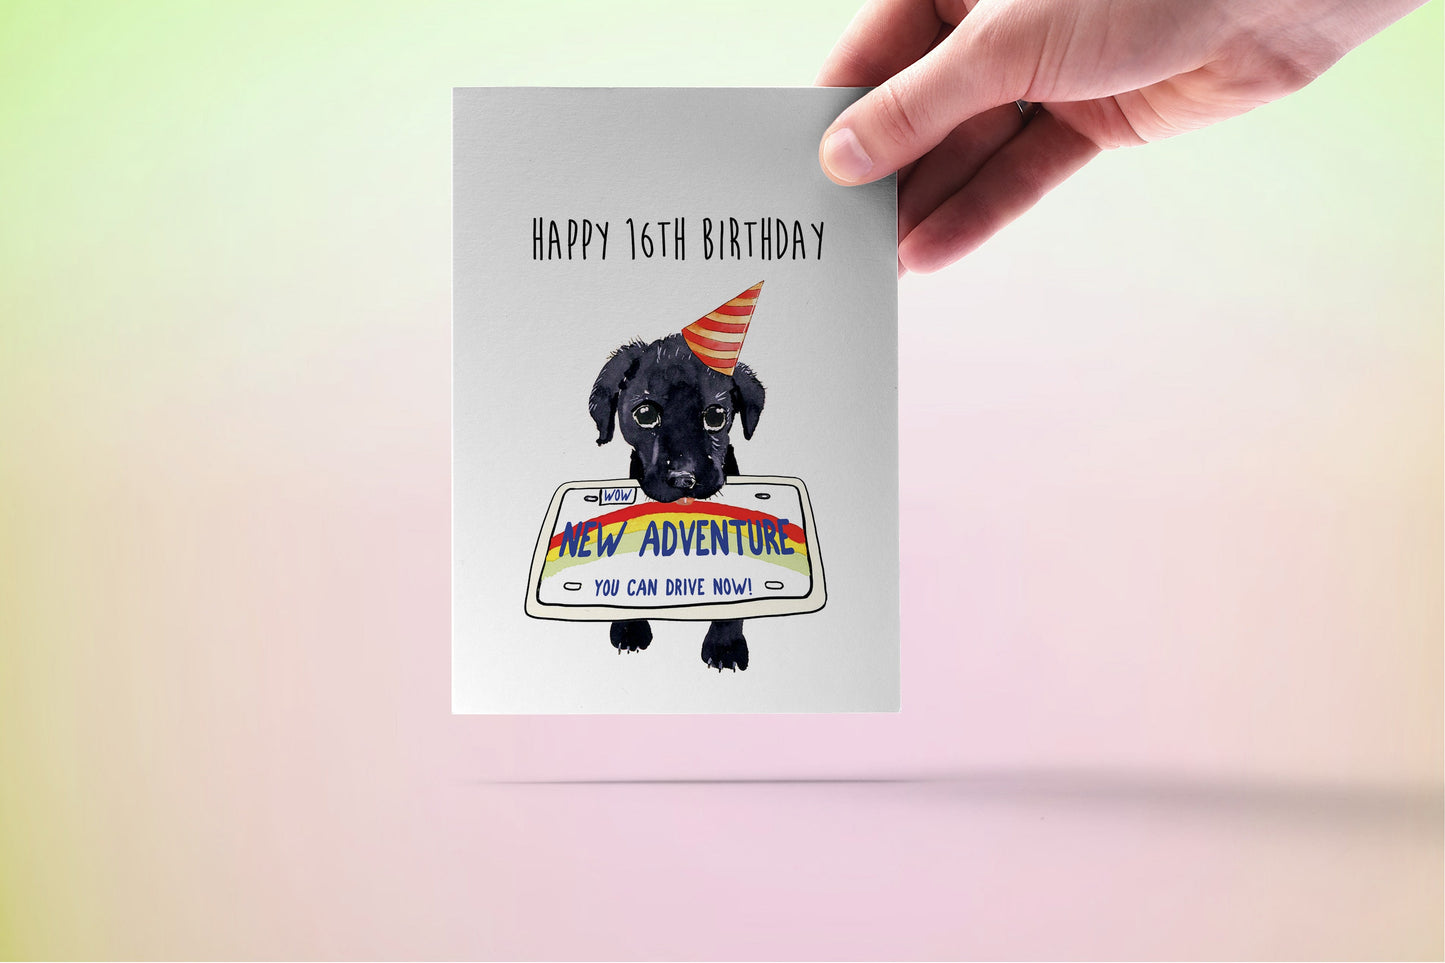 Happy 16th Birthday Card Funny - New Adventure You Can Drive Now - For Black Lab Puppy Dog Lover